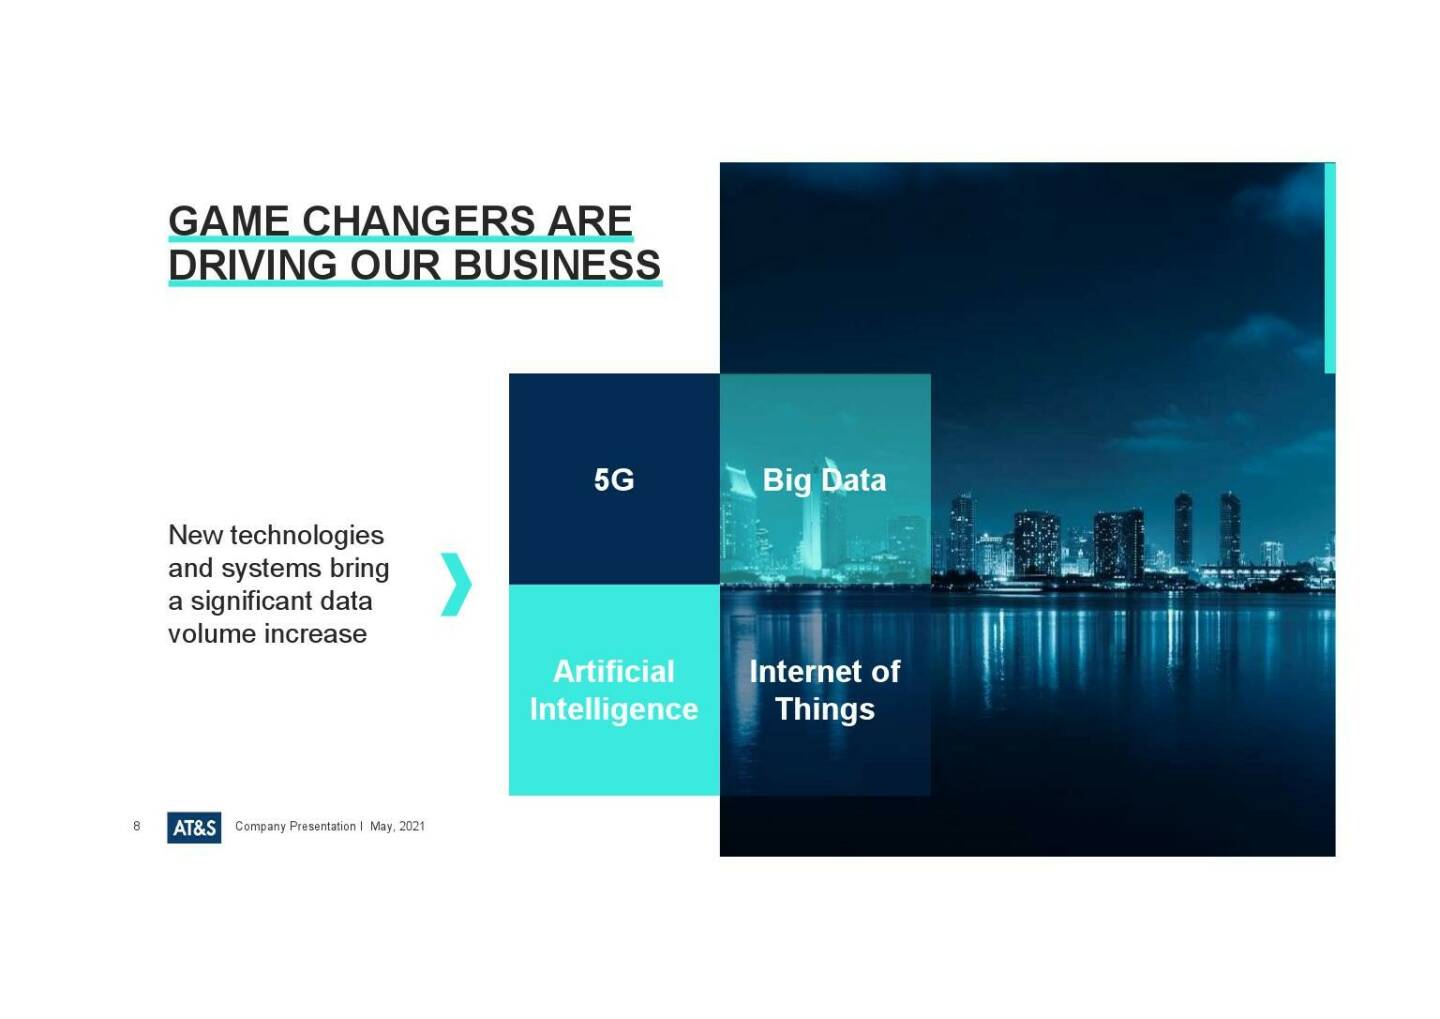 AT&S - Game changers are driving our business 